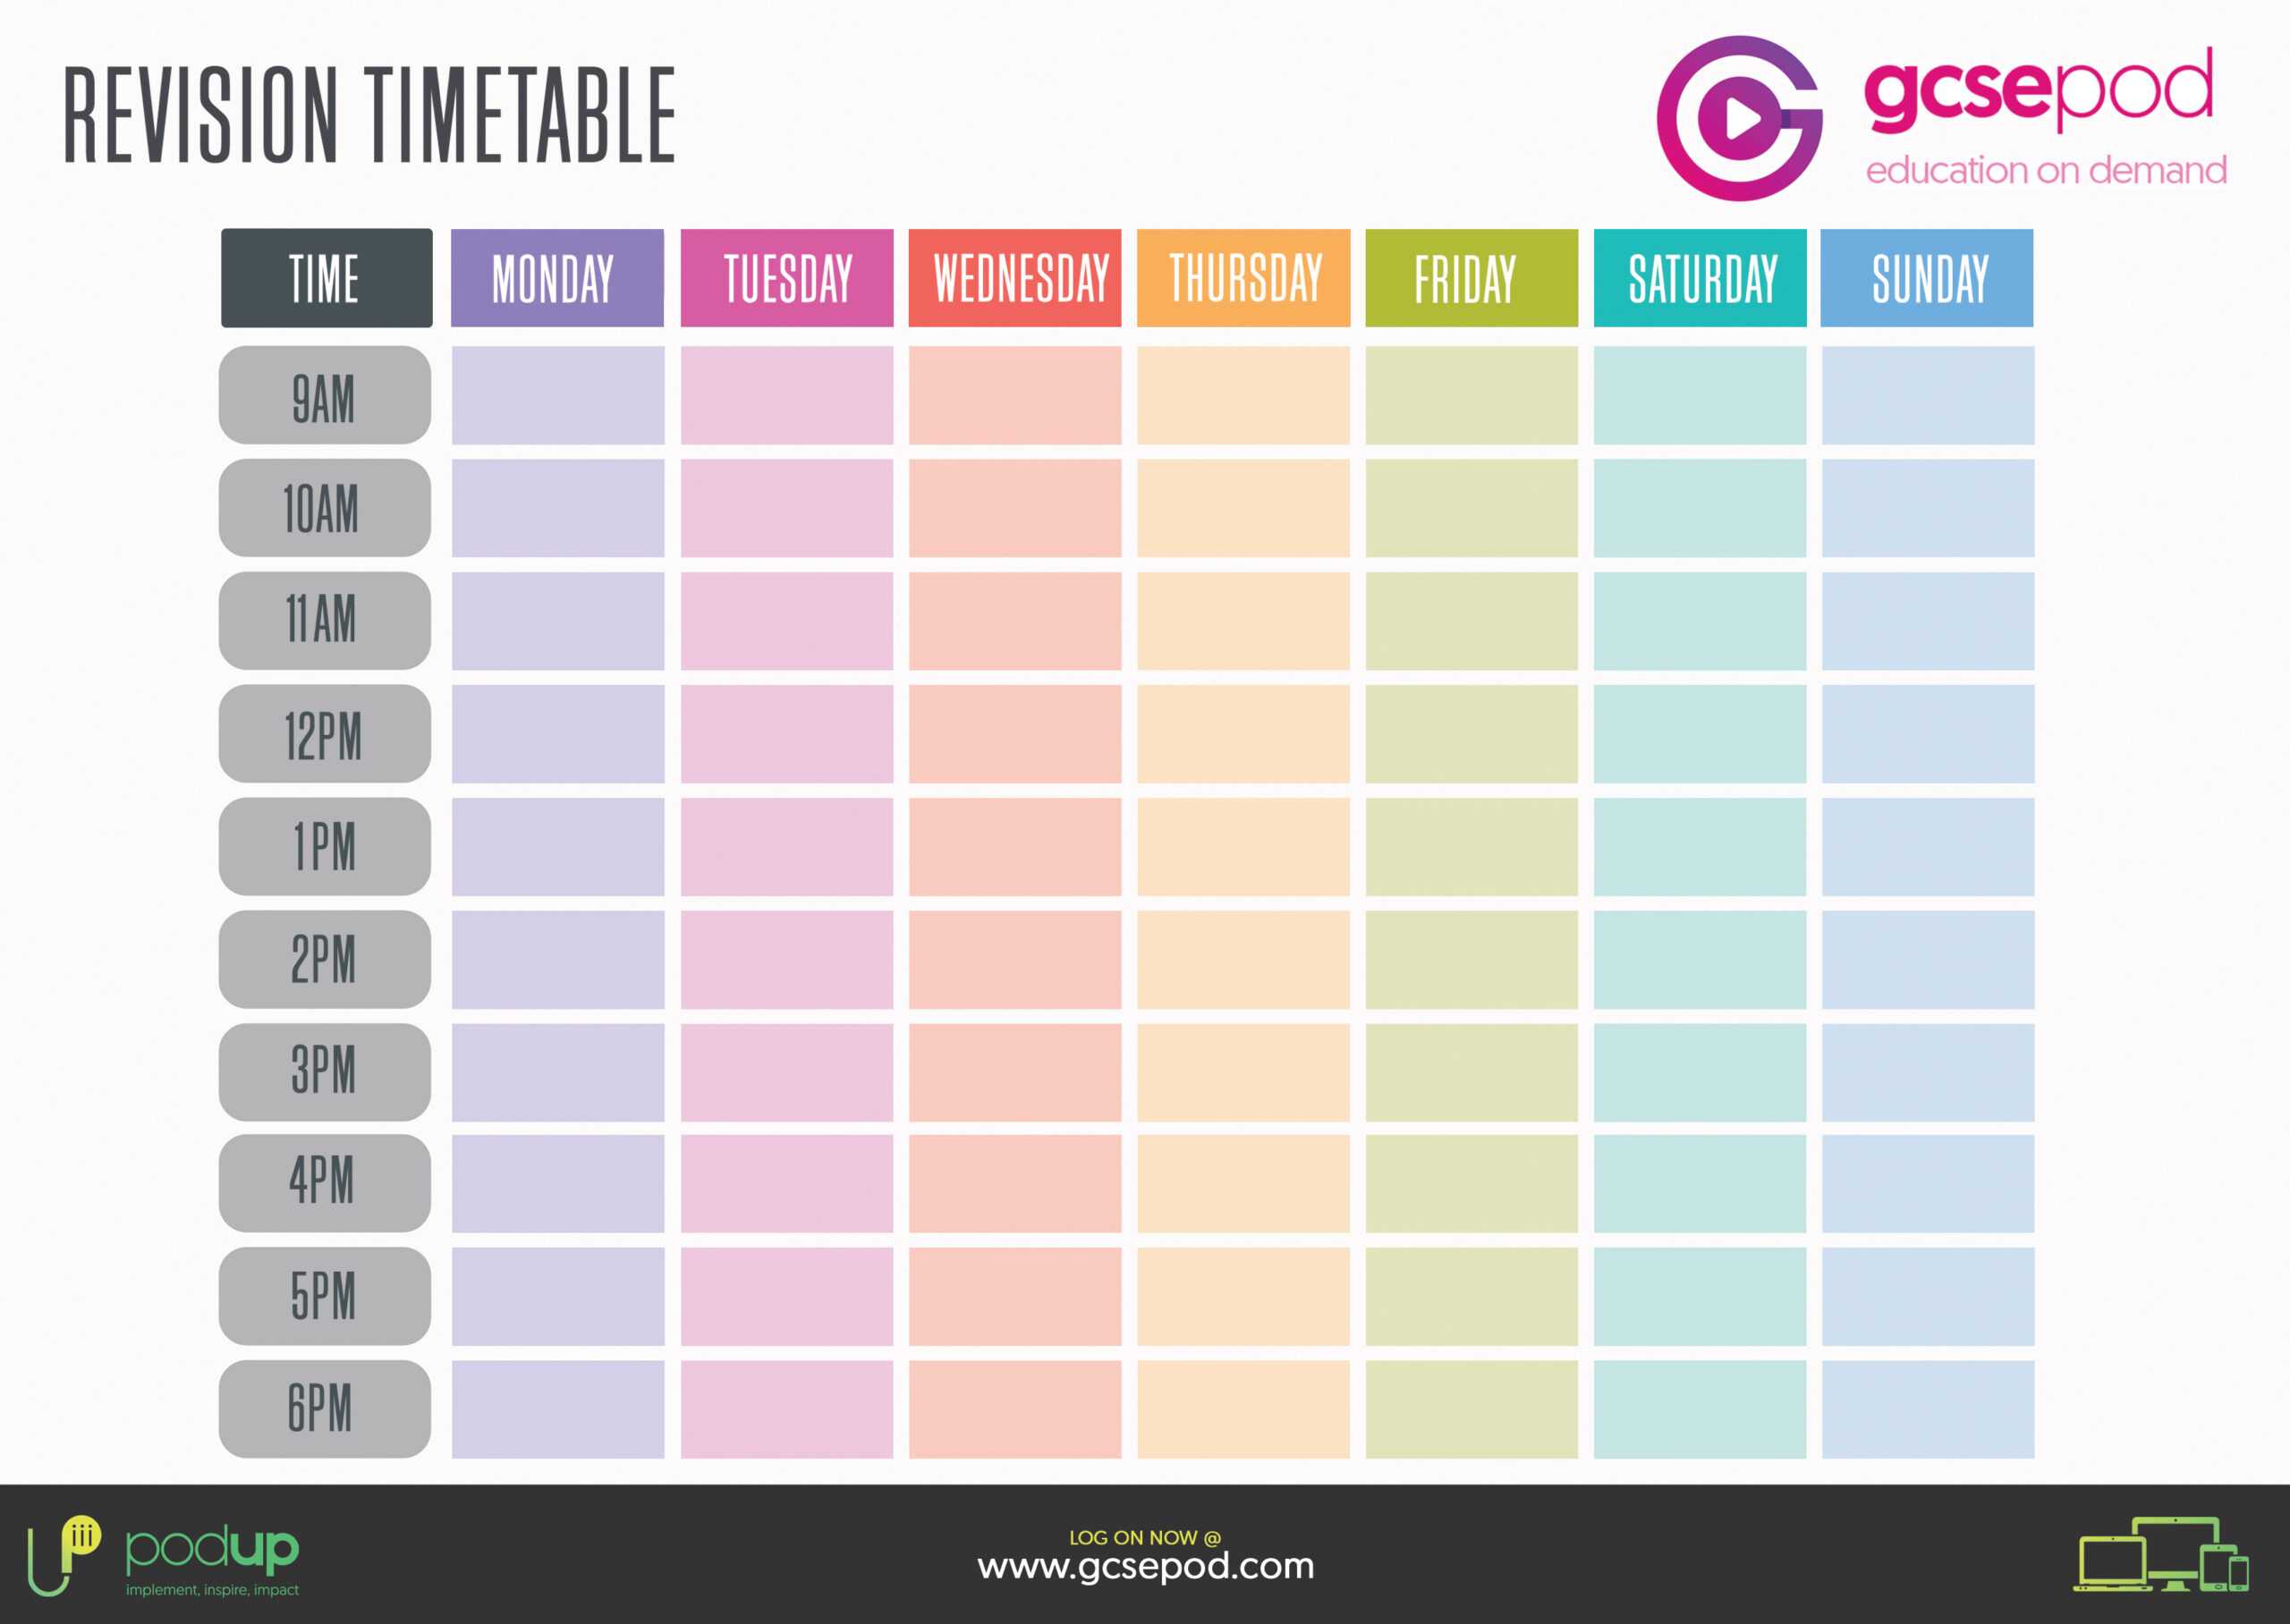 Student Resources | Gcsepod Pertaining To Blank Revision Timetable Template